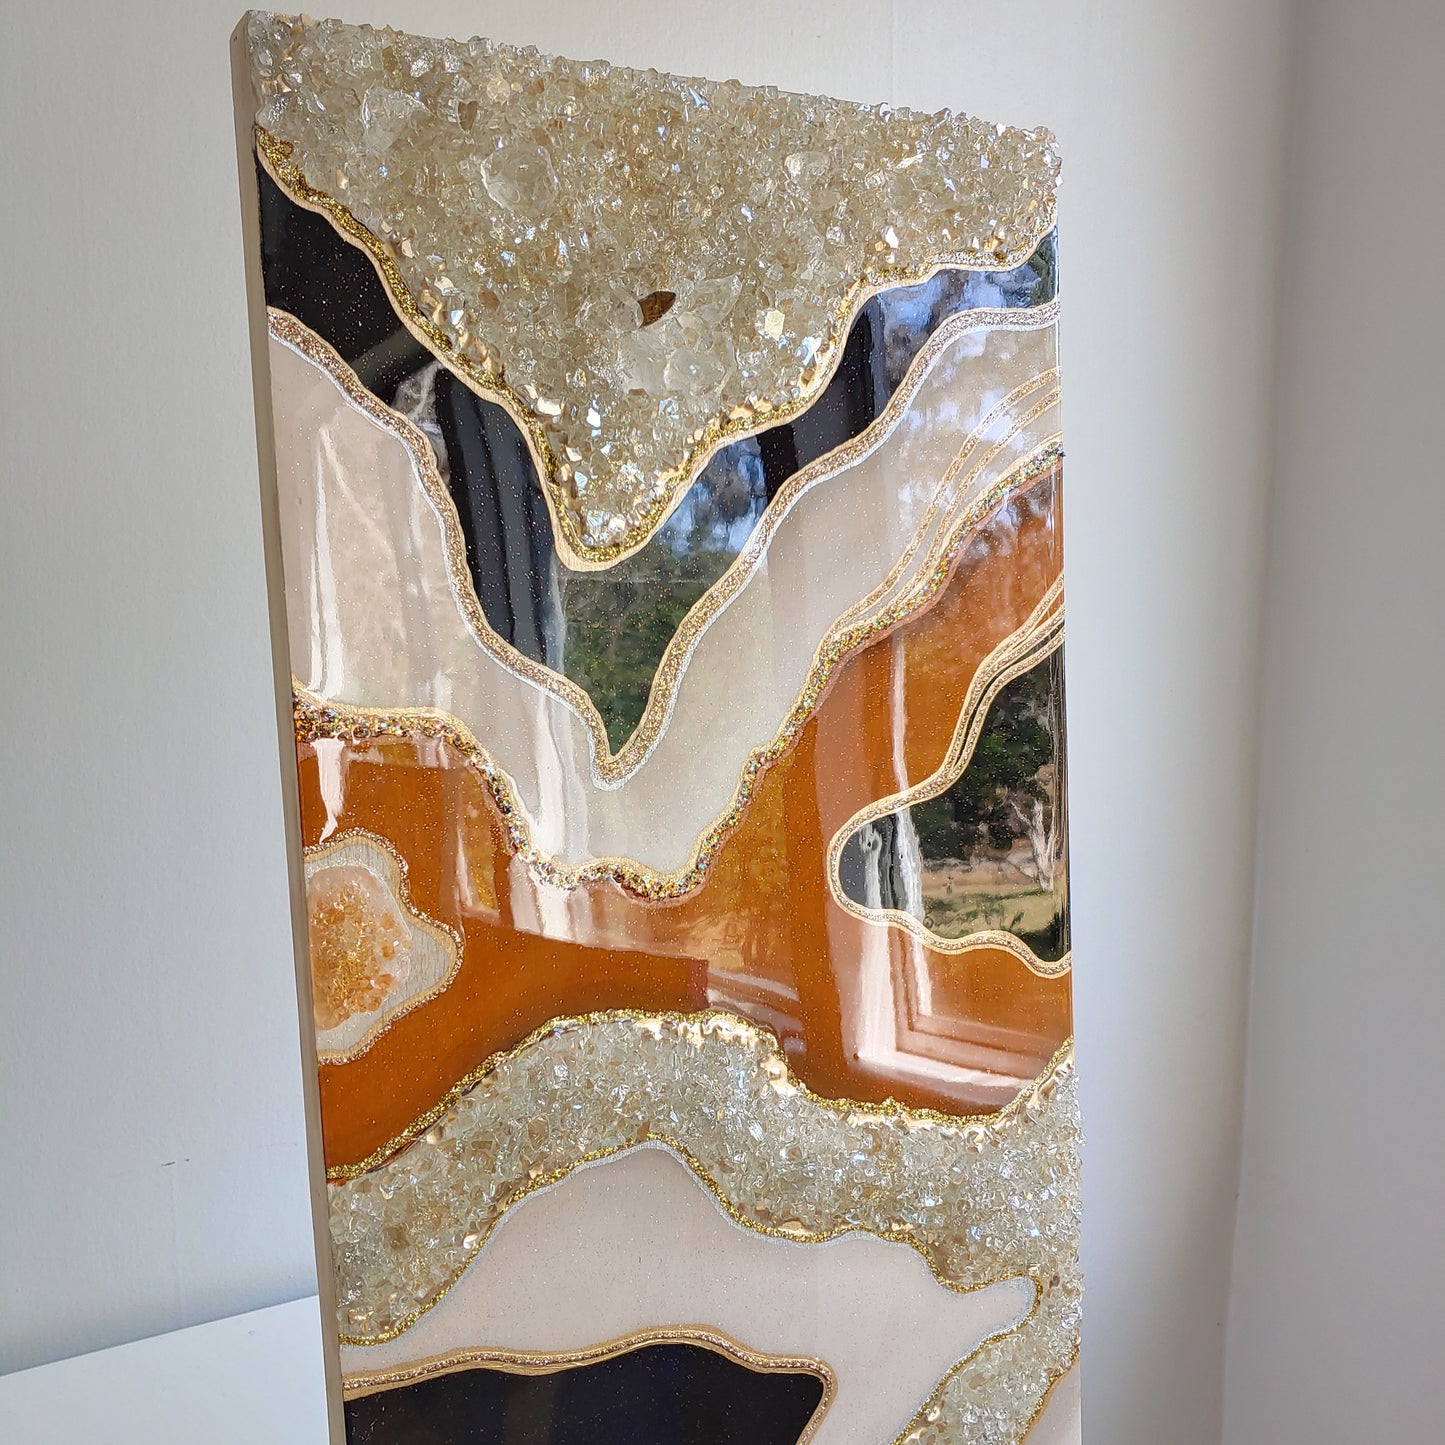 SALE! Caramel & Espresso Resin, Glass and crystal wall art panel